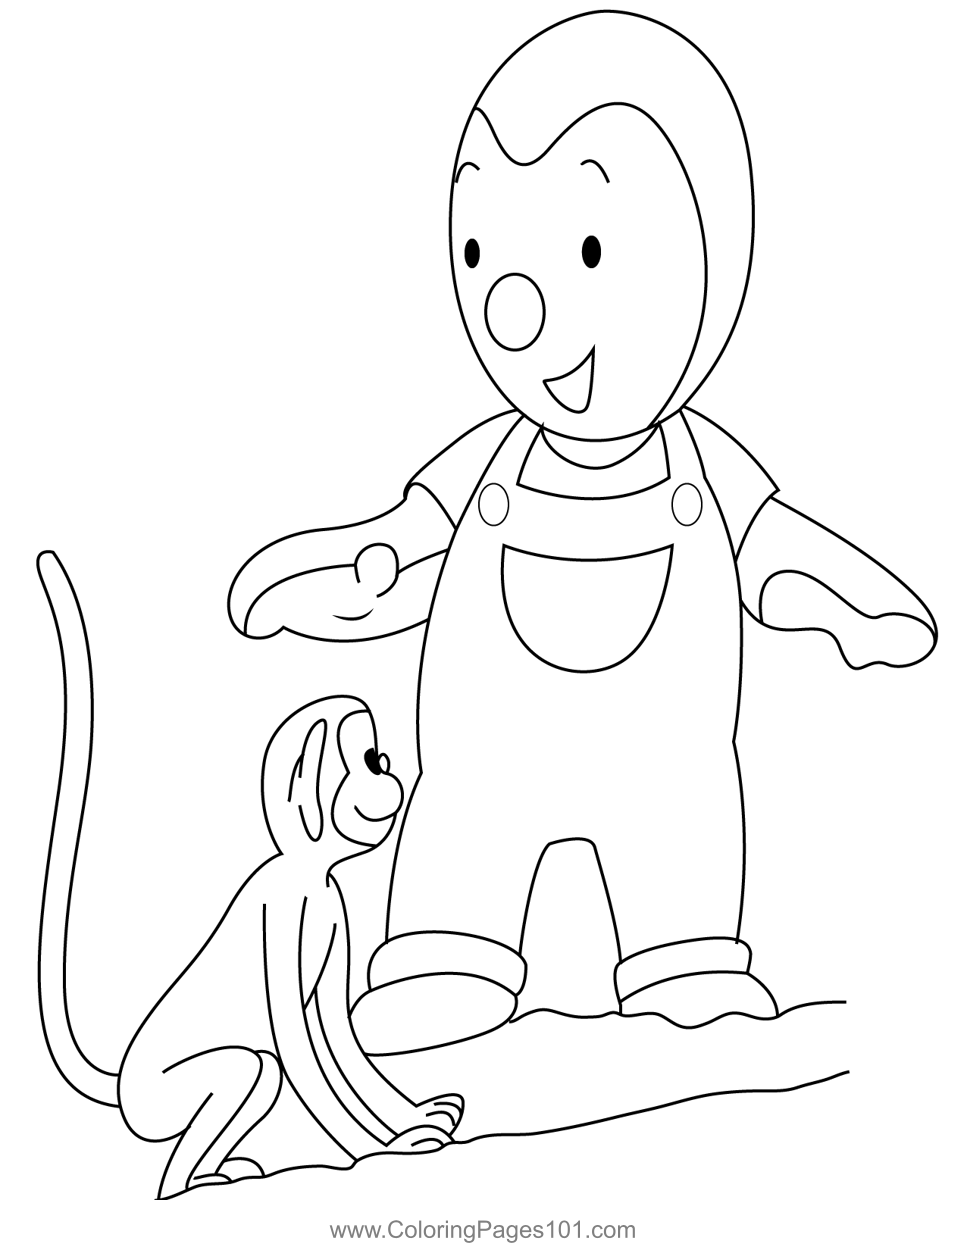 Charley With Monkey Coloring Page for Kids - Free Charley and Mimmo ...